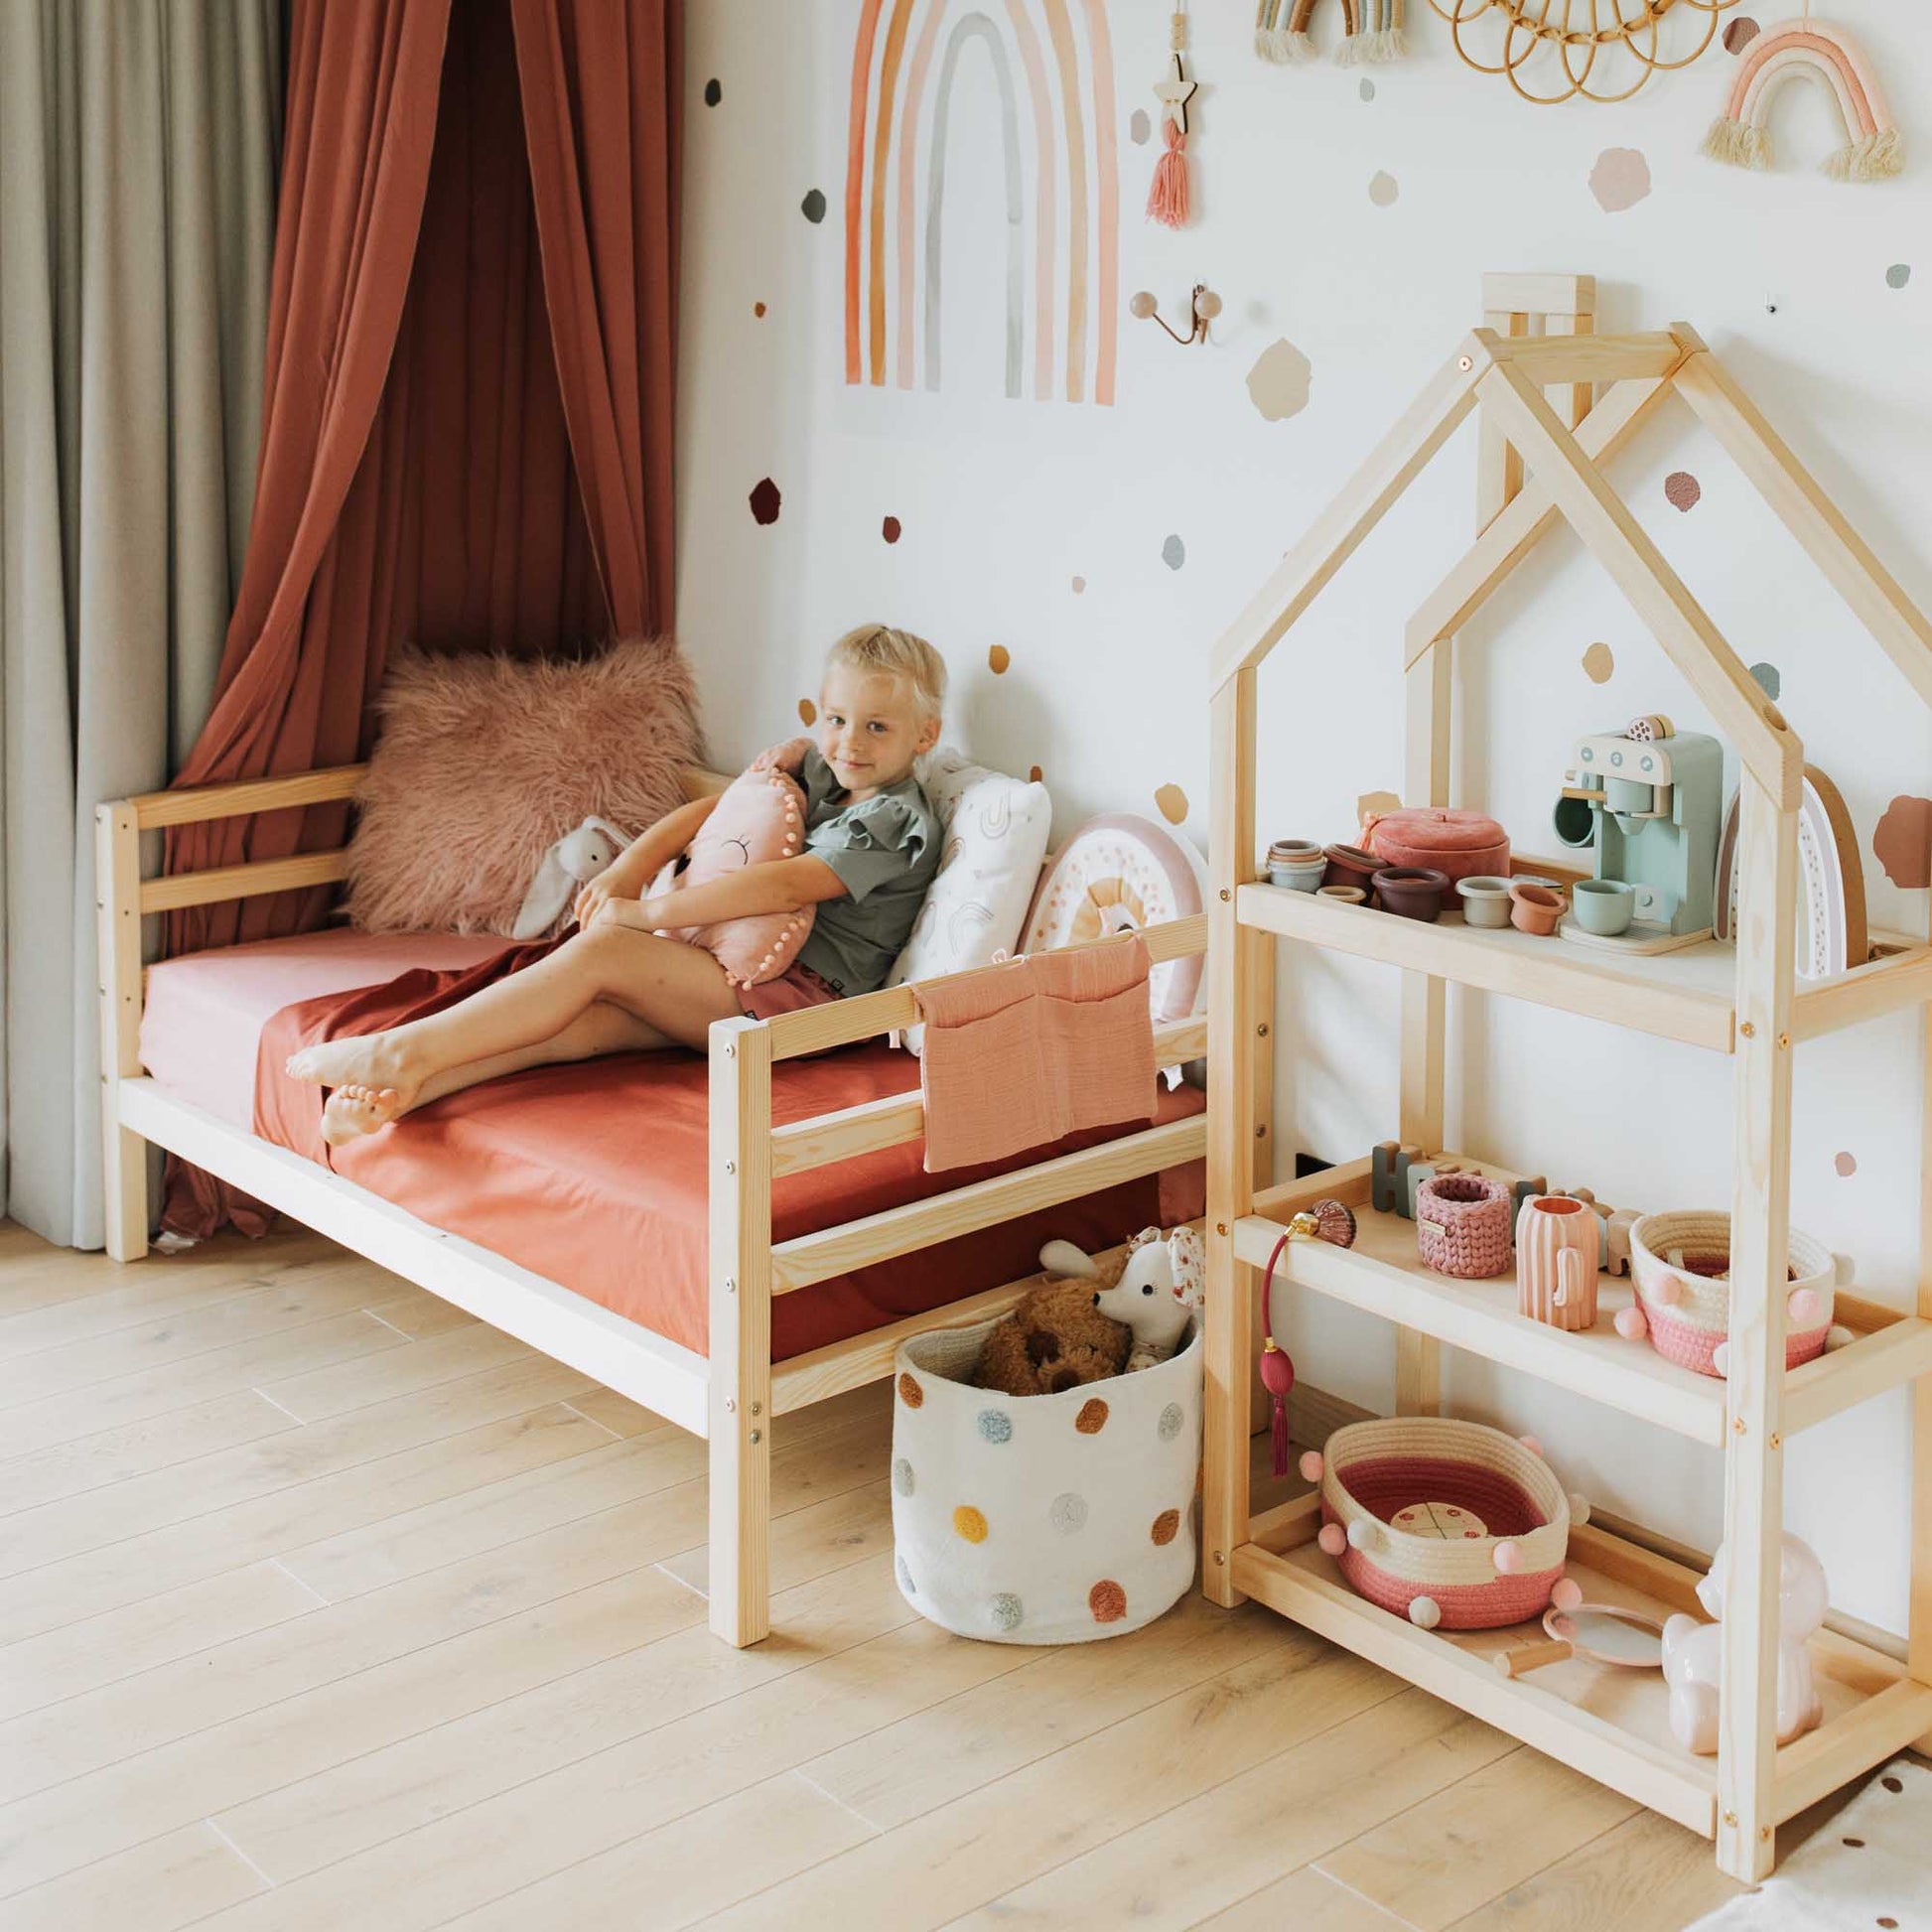 A girl is sitting on a Sweet Home From Wood 2-in-1 transformable kids' bed with a 3-sided horizontal rail in a child's room.